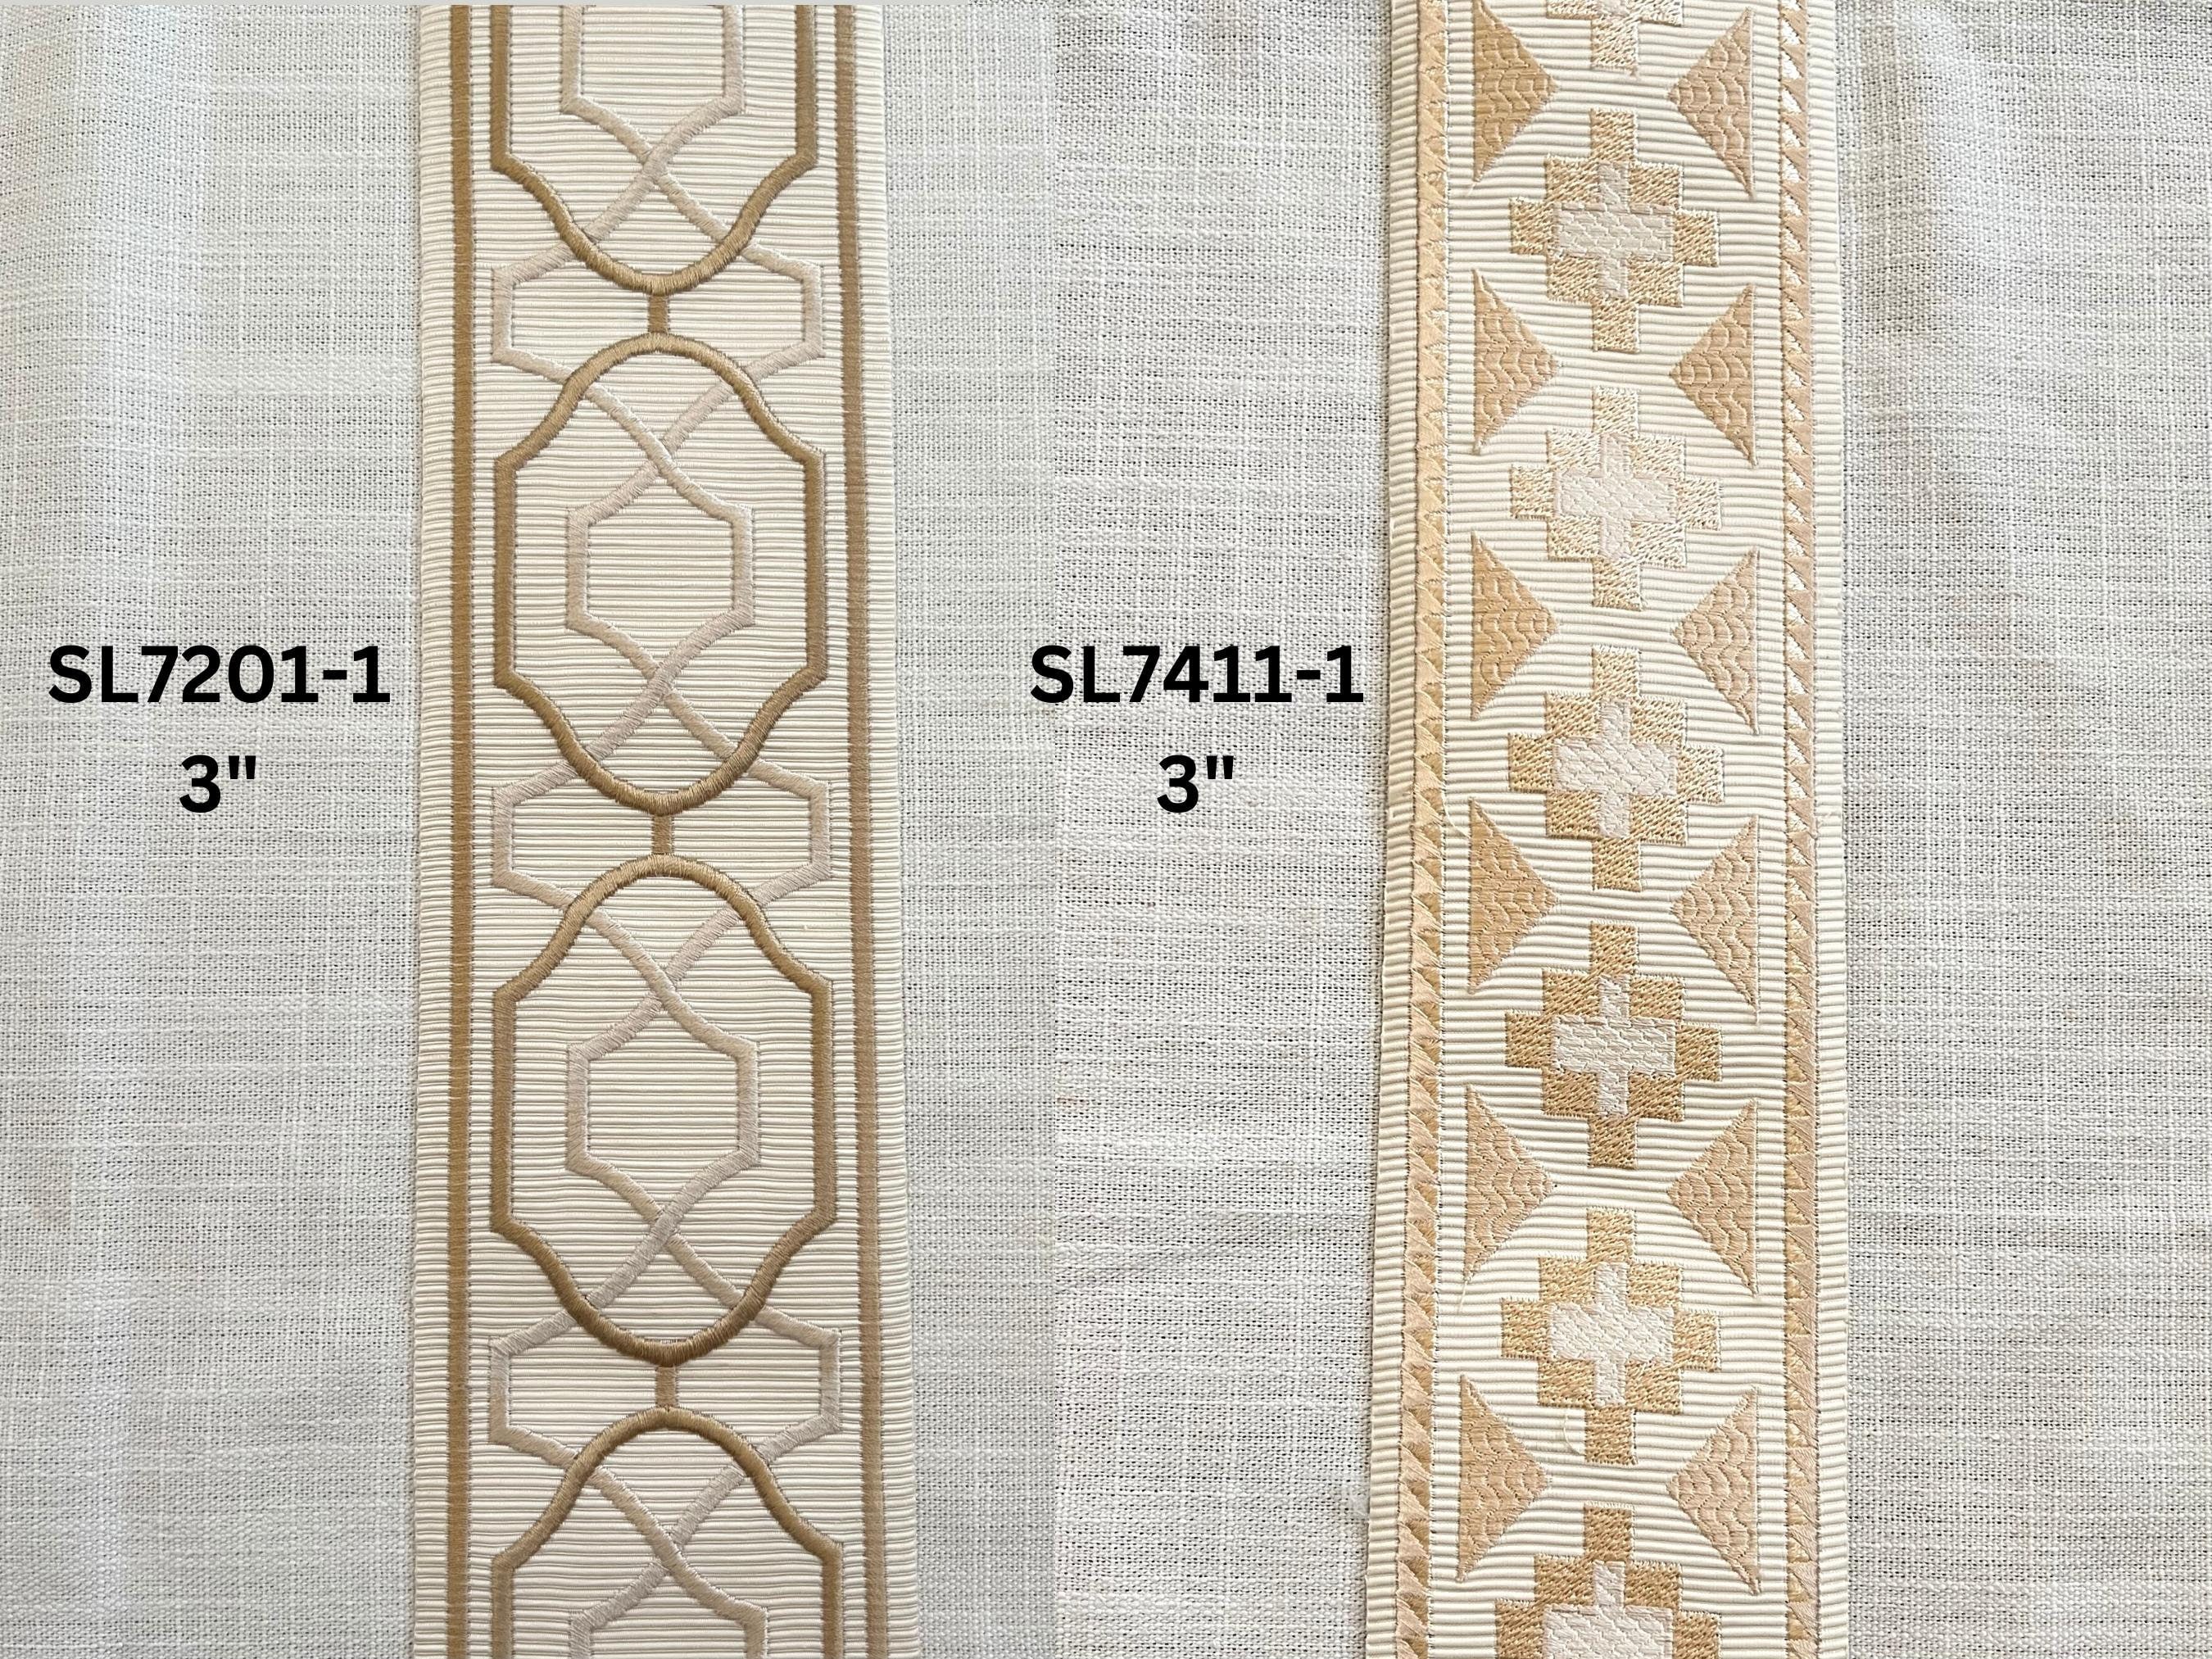 Beige Taupe Decorative Trims for Drapery, the Sold Upholstery Yard Pillow Etsy by Border, Curtain - Tapes, Ribbon